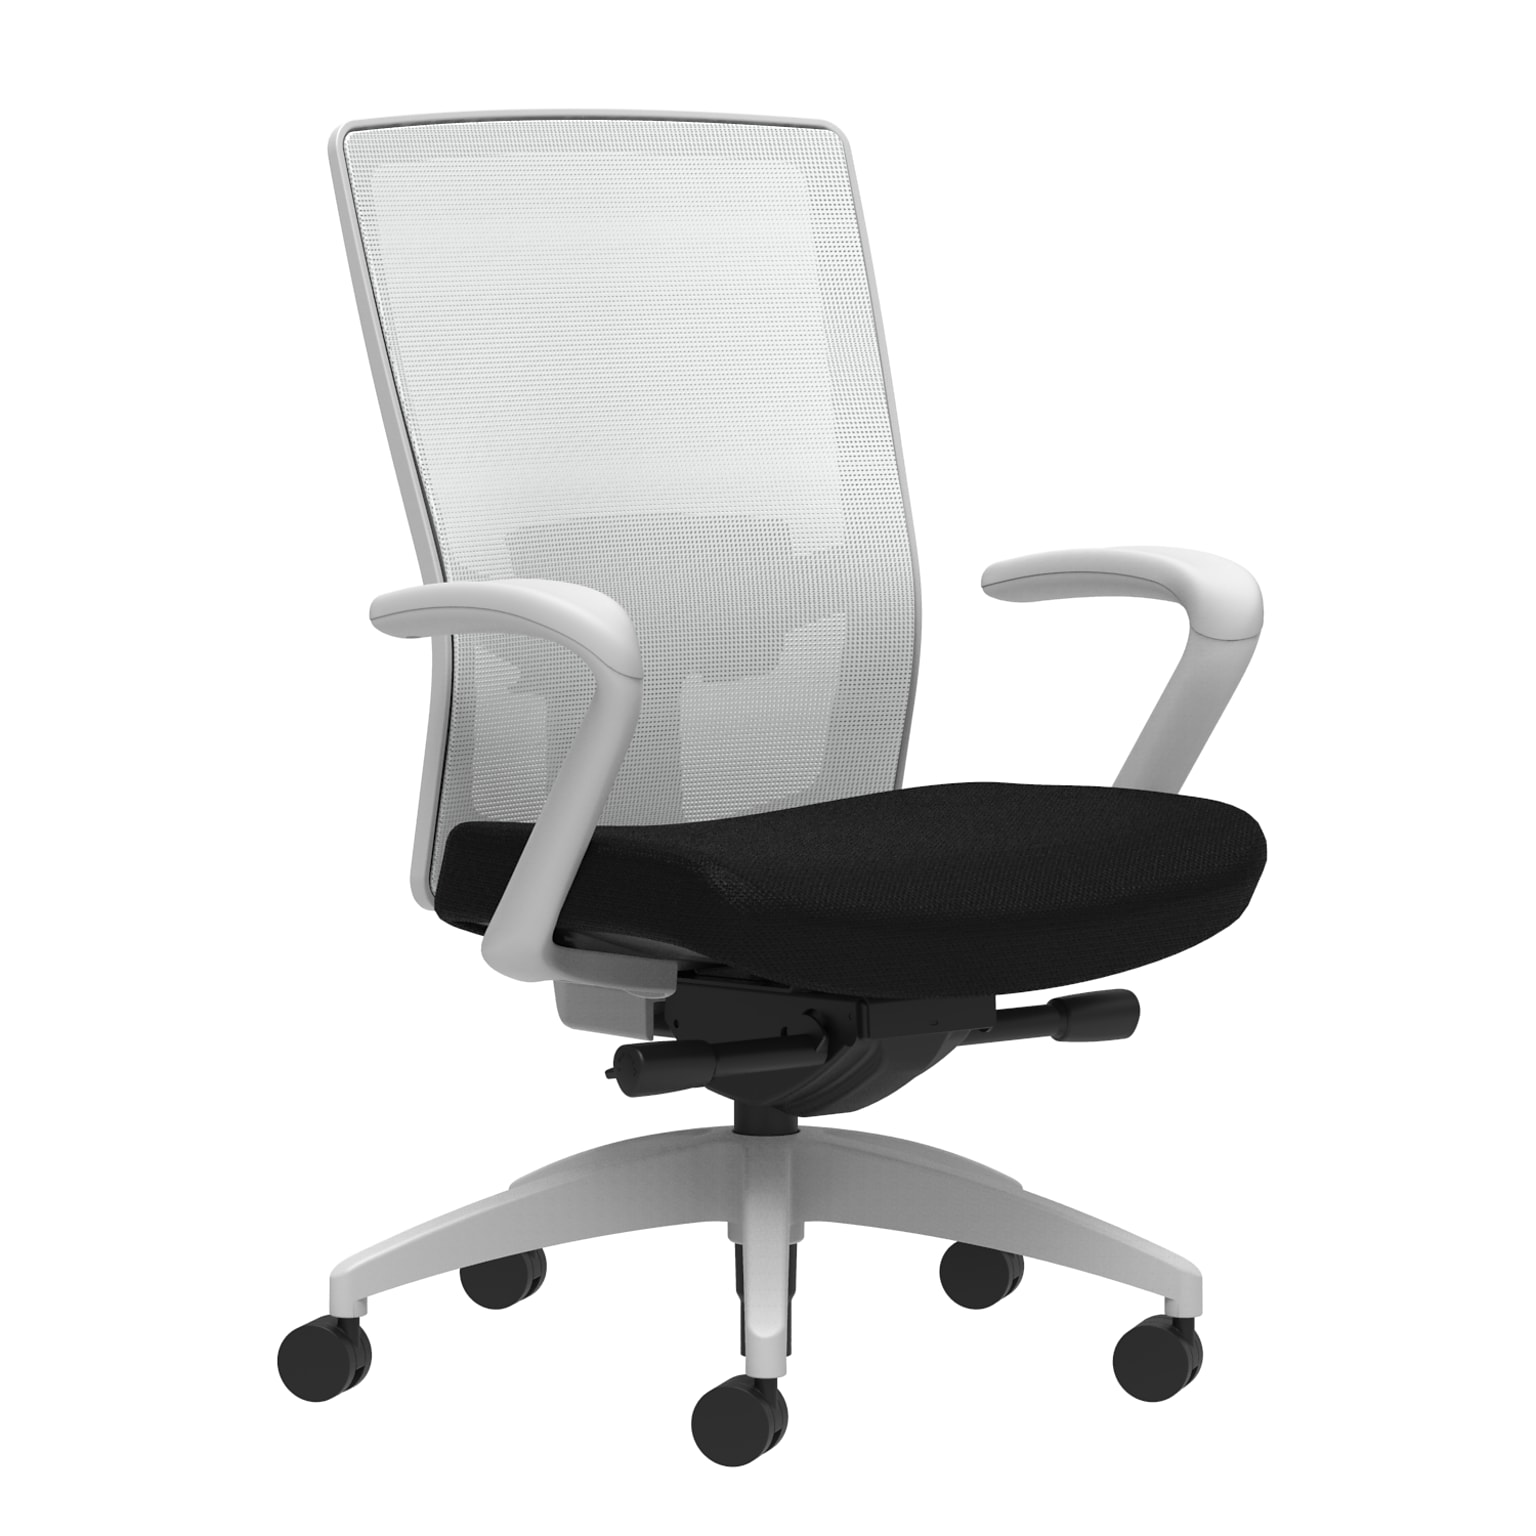 Union & Scale Workplace2.0™ Fabric Task Chair, Black, Adjustable Lumbar, Fixed Arms, Advanced Synchro-Tilt Seat Control (53589)